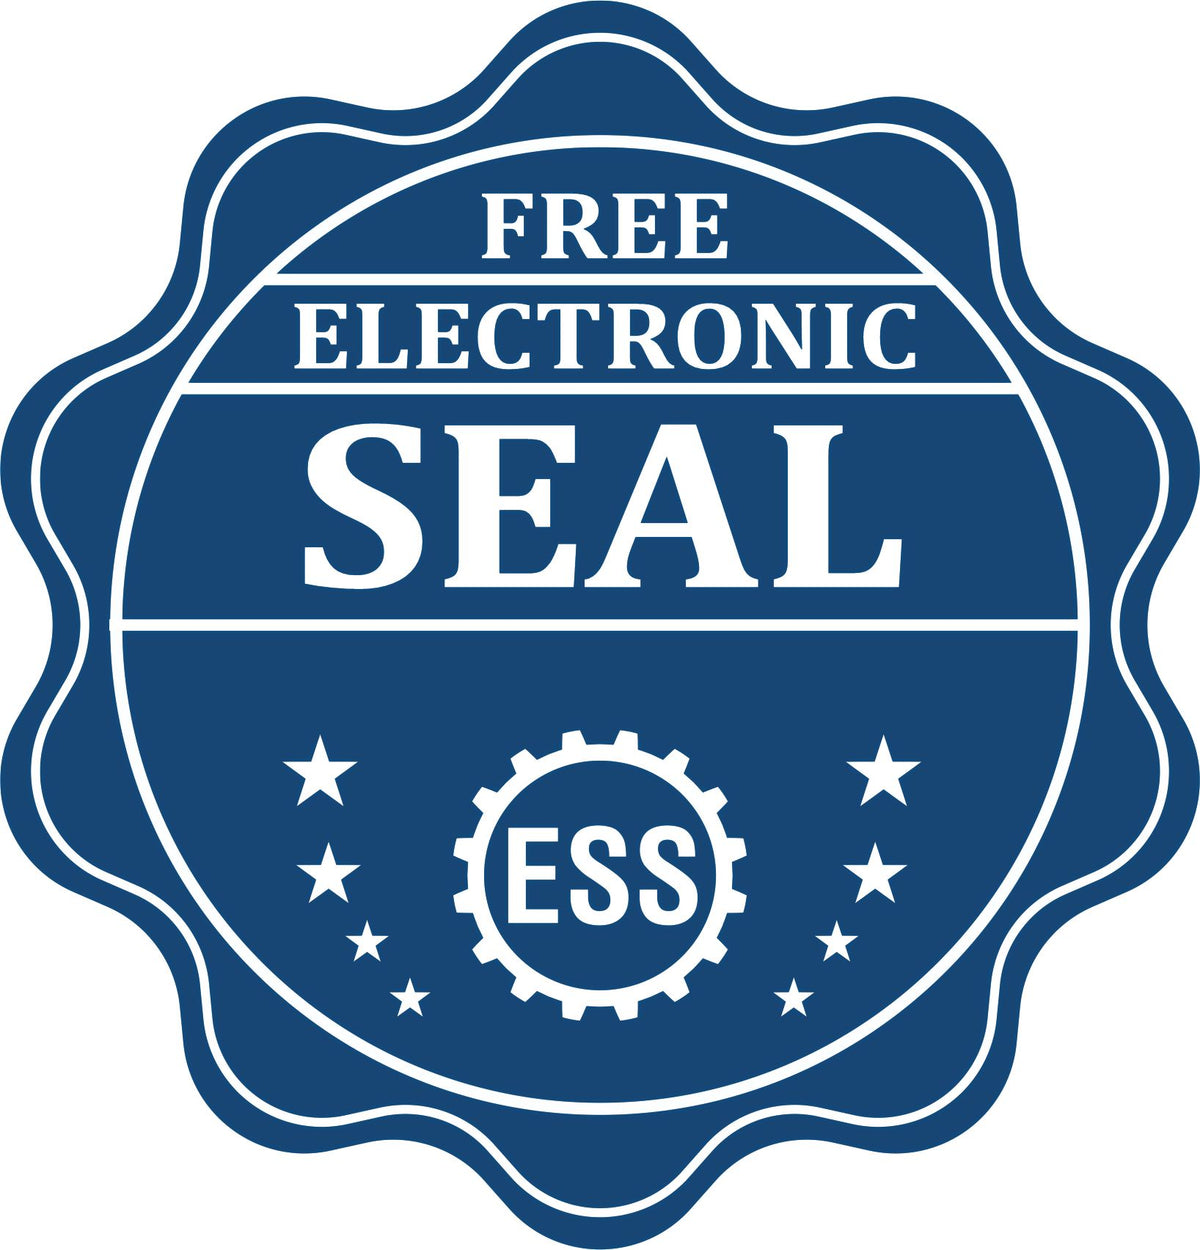 A badge showing a free electronic seal for the Handheld North Carolina Professional Geologist Embosser with stars and the ESS gear on the emblem.